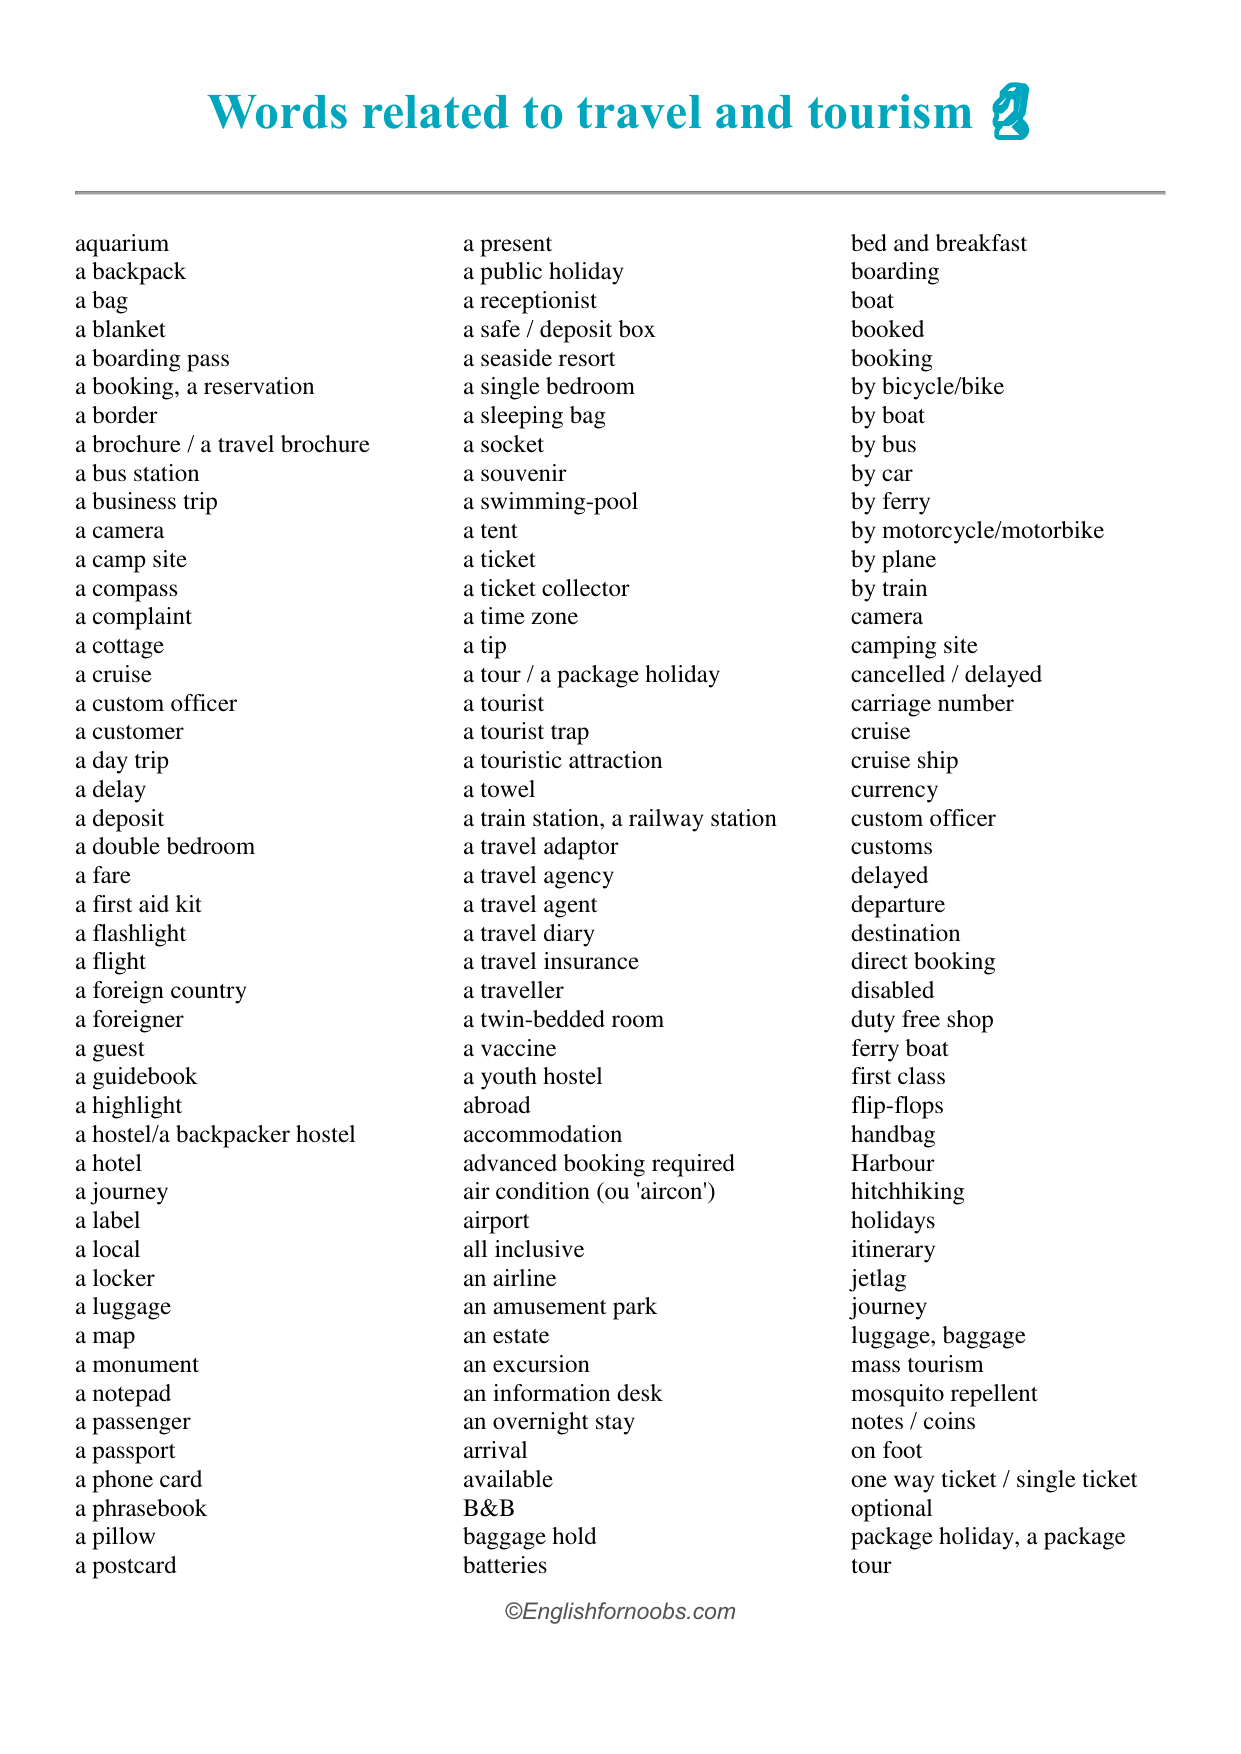 words related with tourism